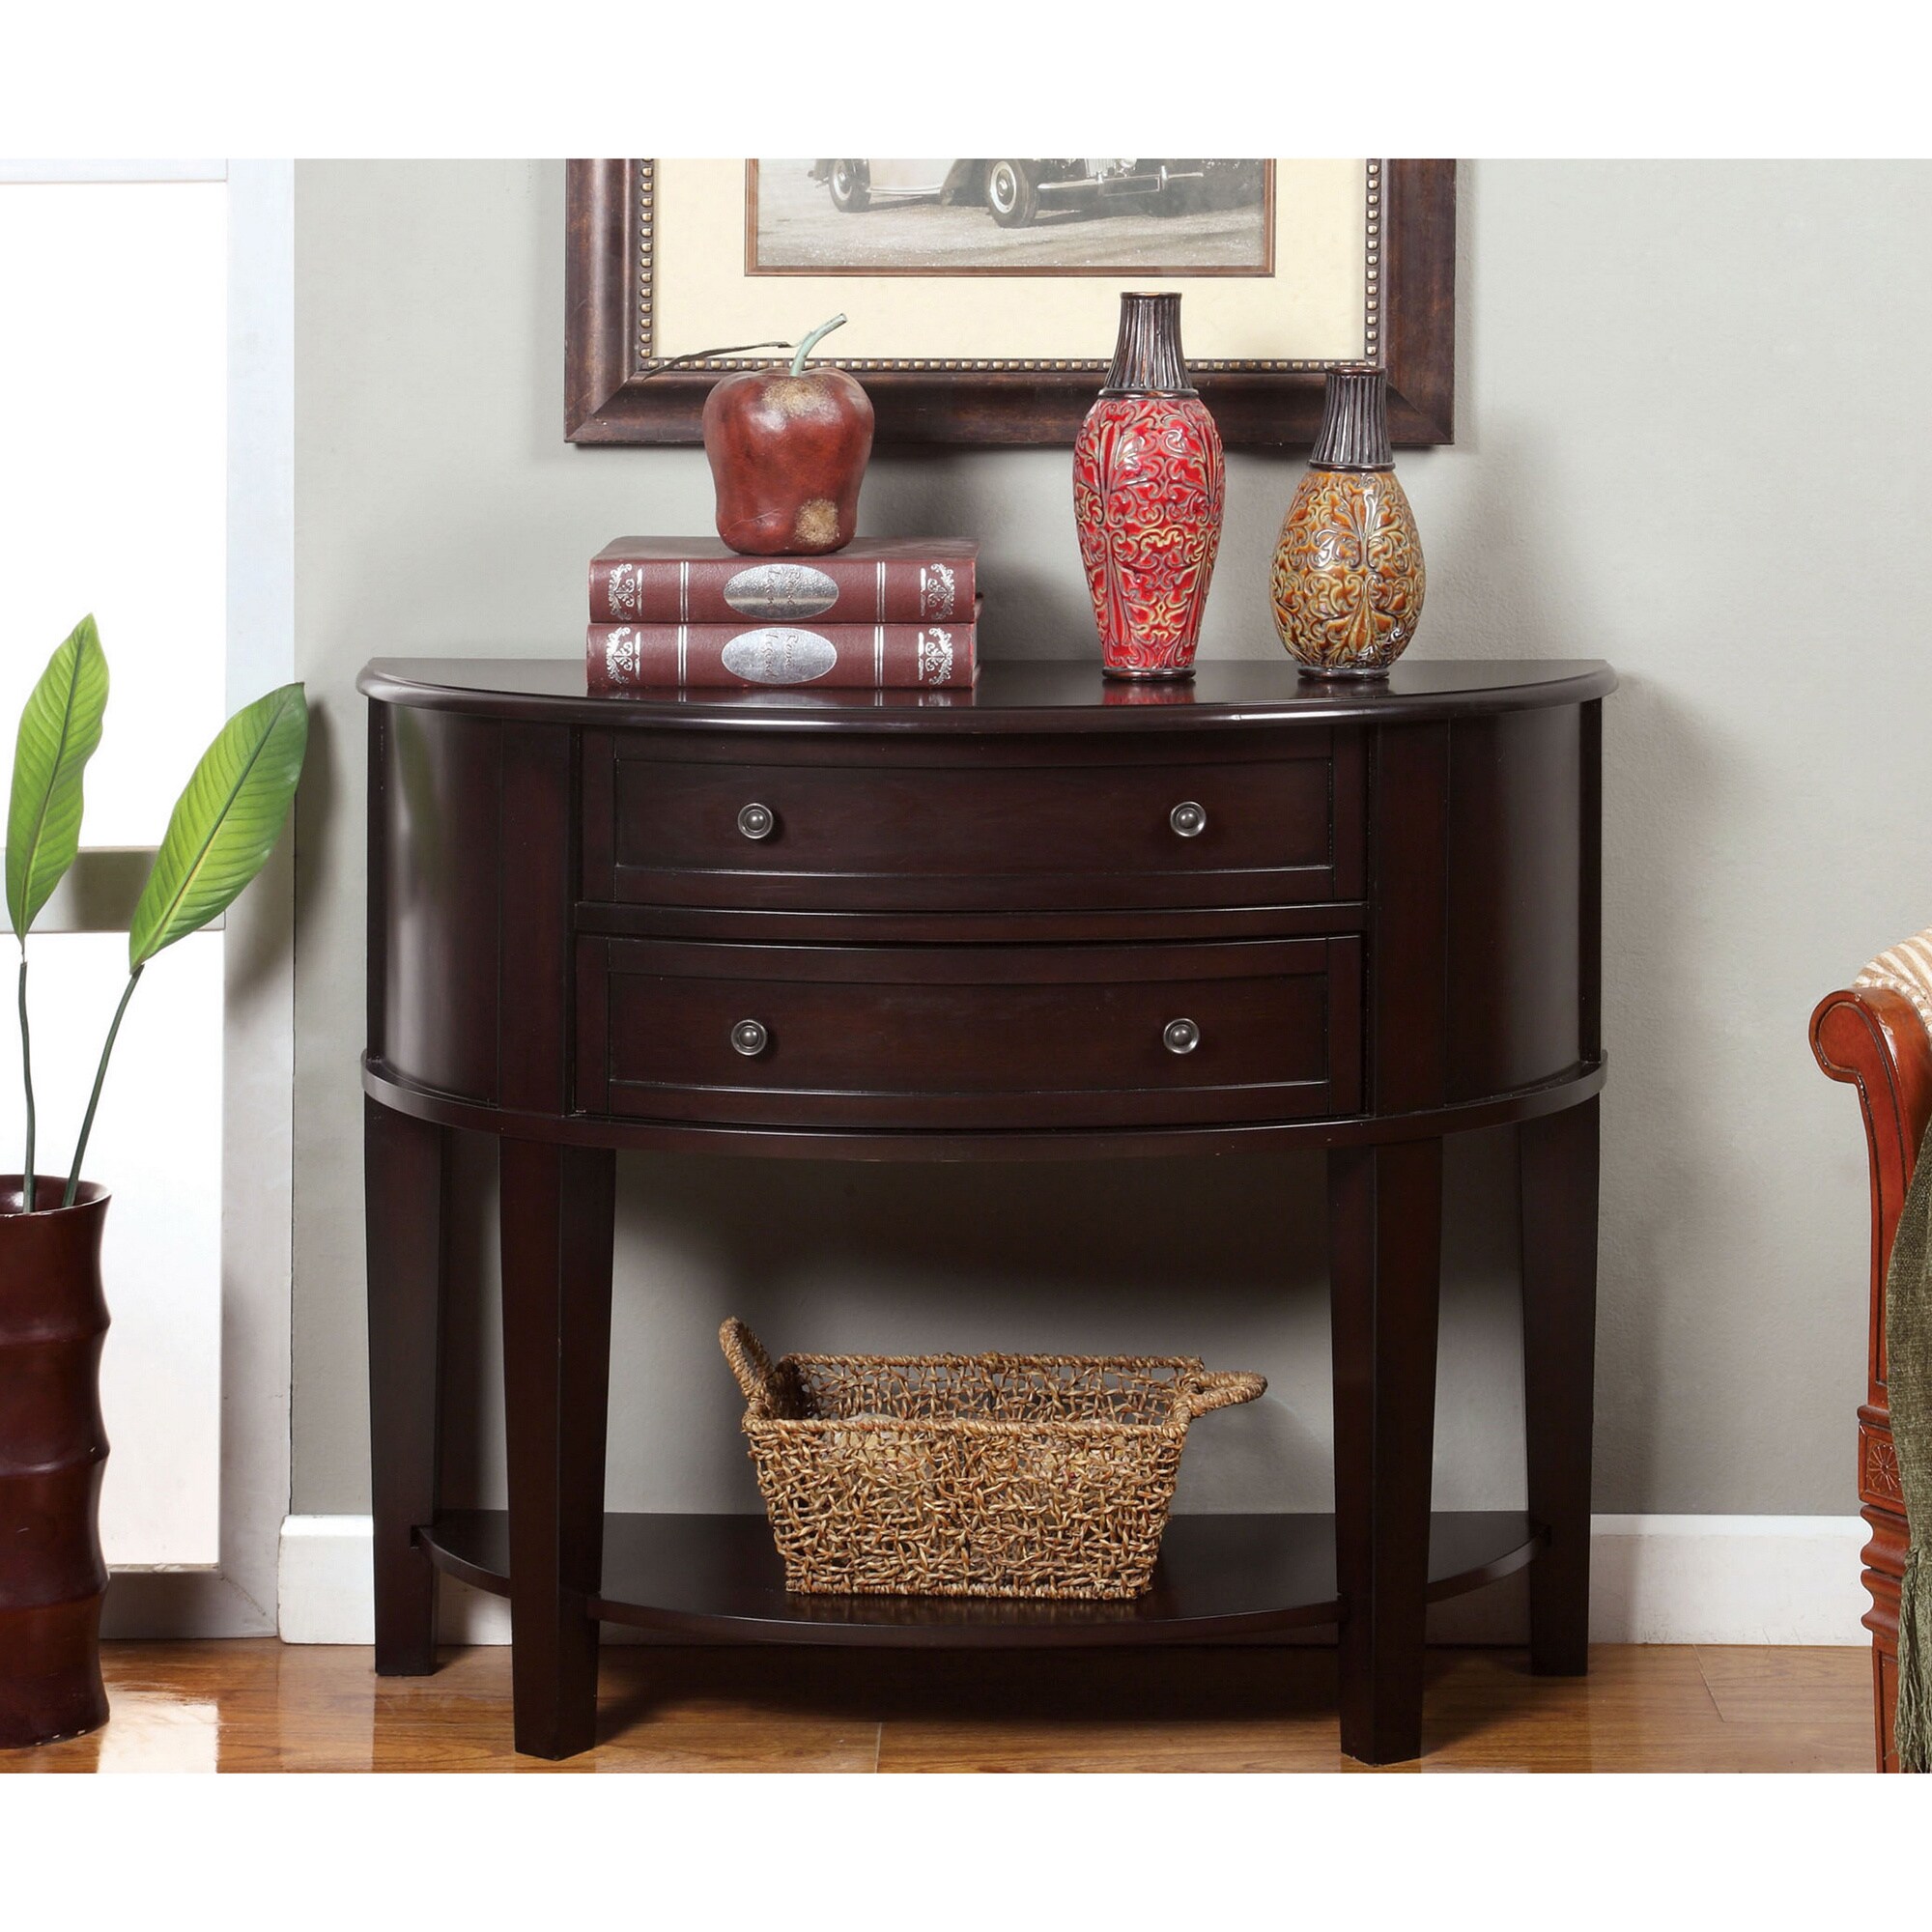 Shop Chantz Traditional Espresso 2-drawer Occasional Accent Table by